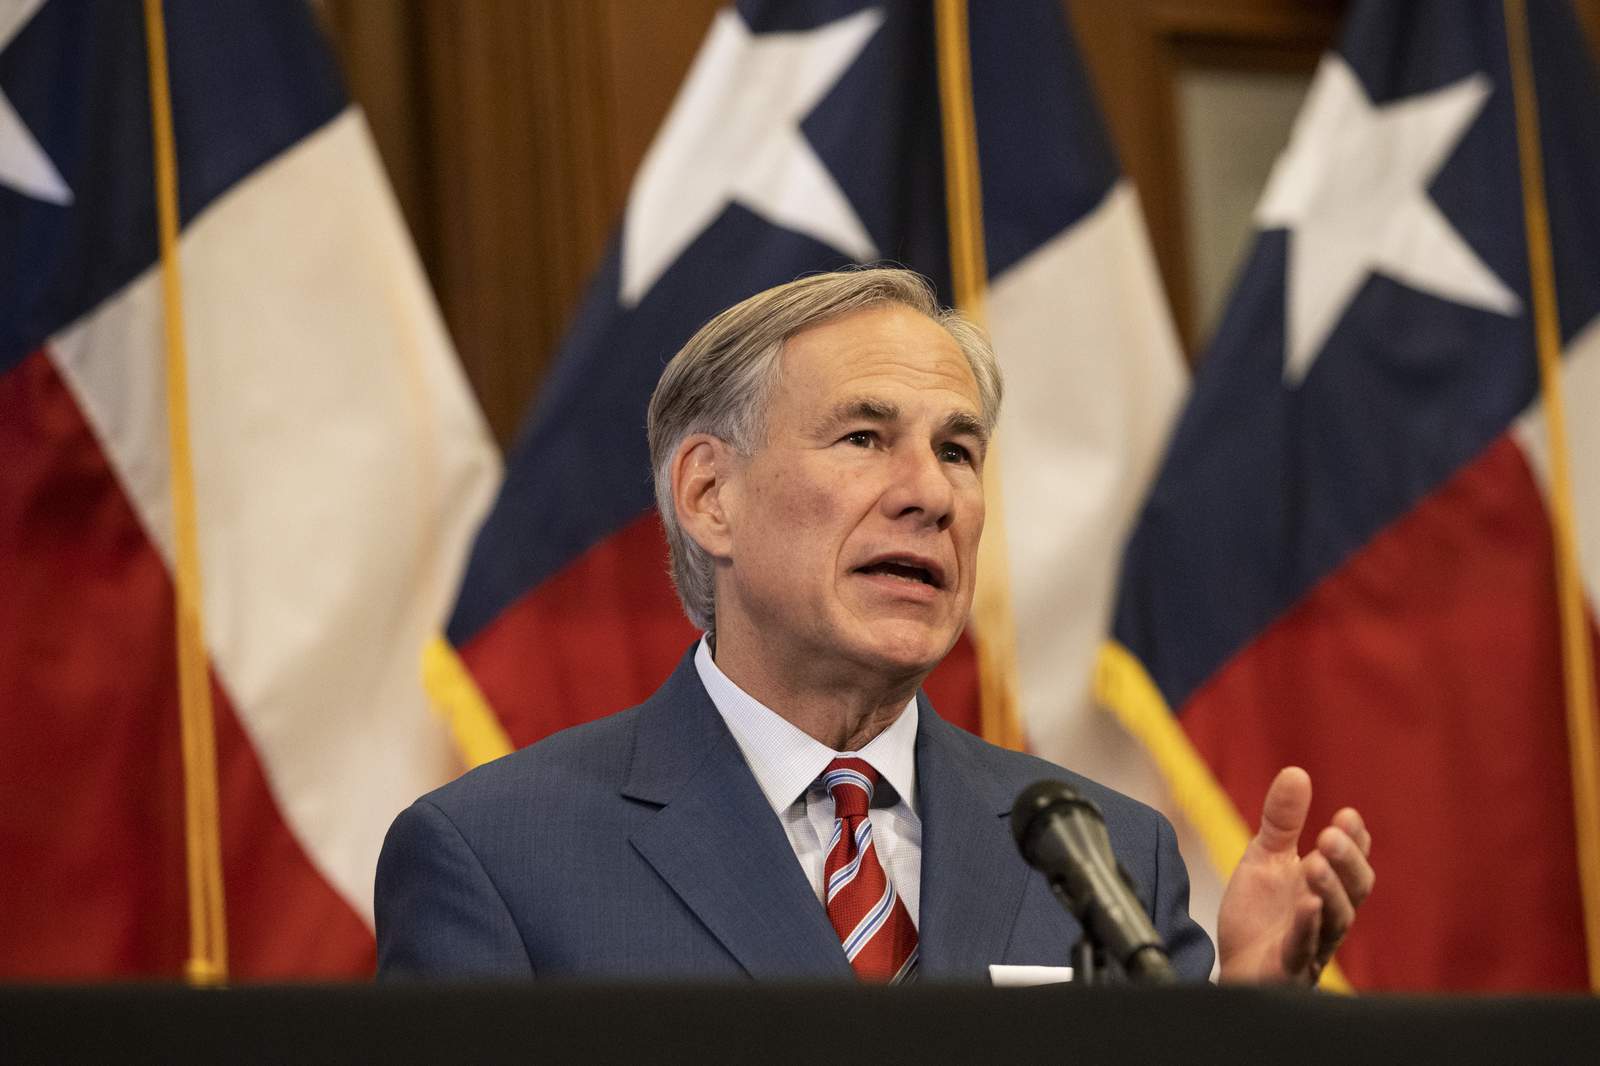 Gov. Abbott to address rising COVID-19 hospitalizations in Texas as they set 1-day high Monday